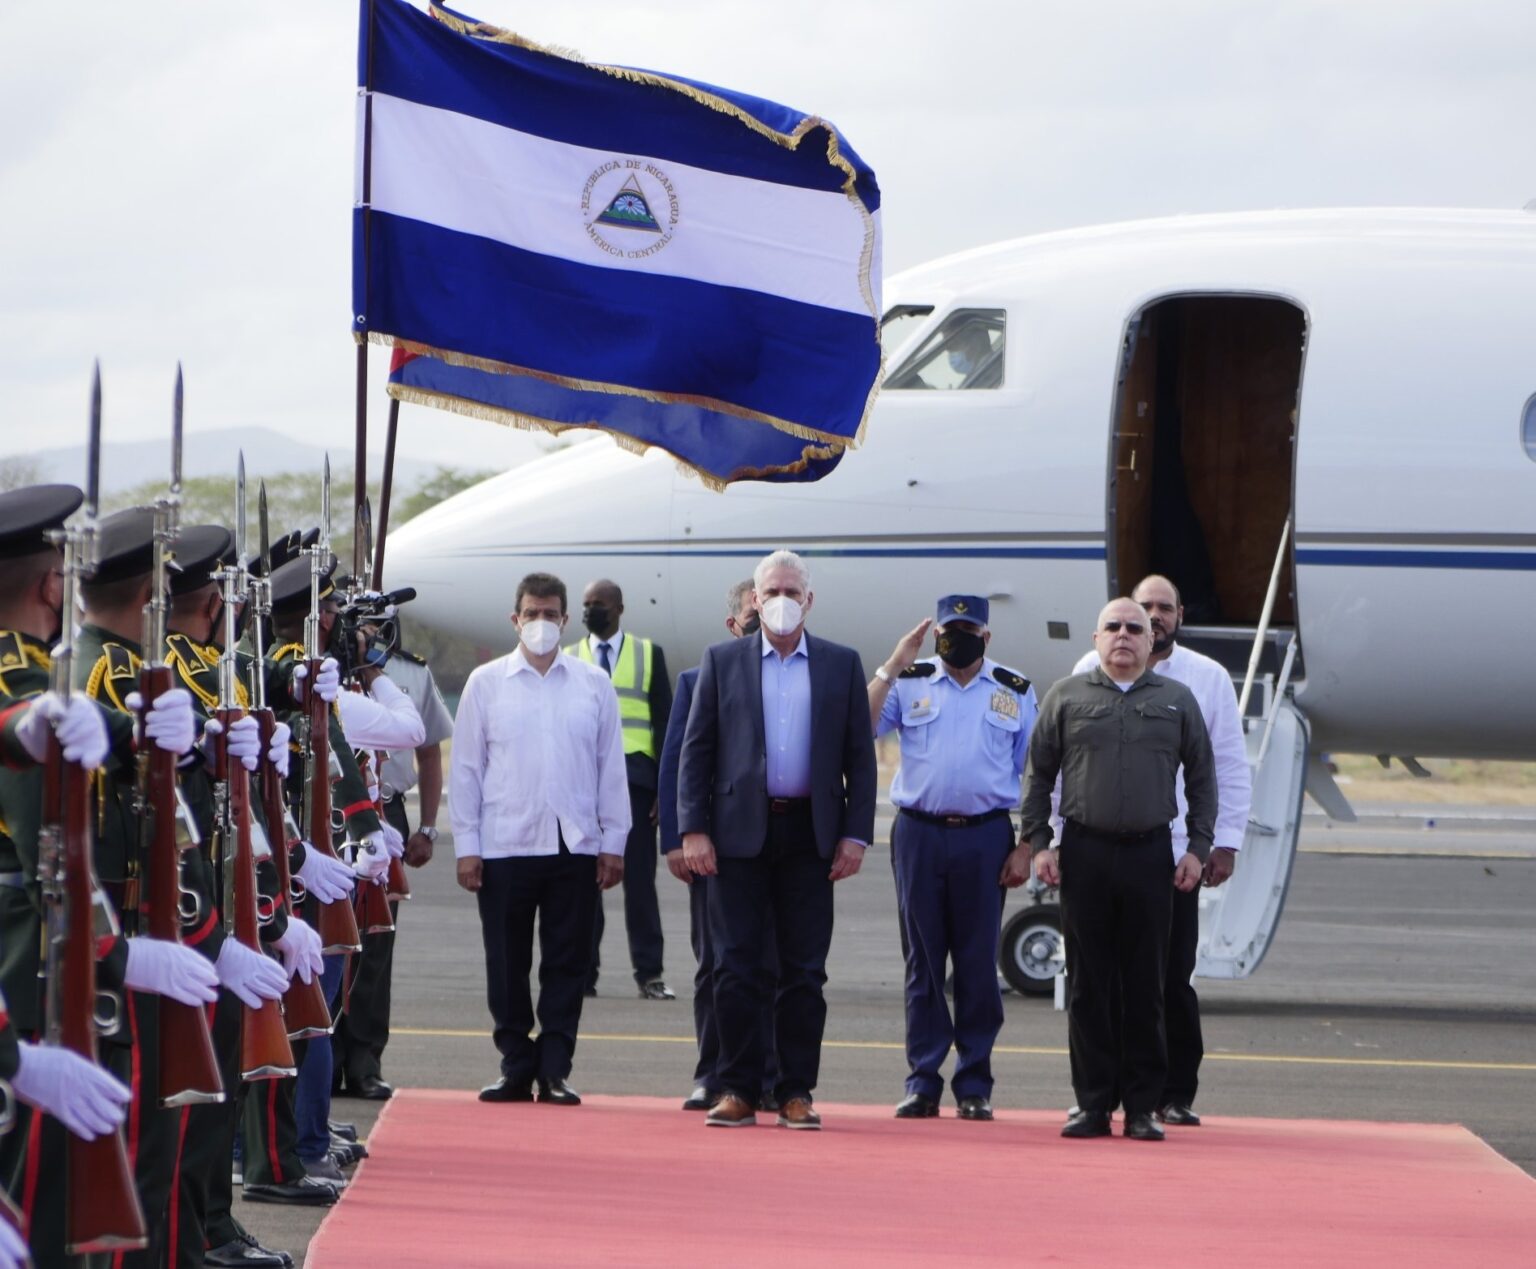 diaz-canel-to-attend-presidential-swearing-in-ceremony-in-nicaragua